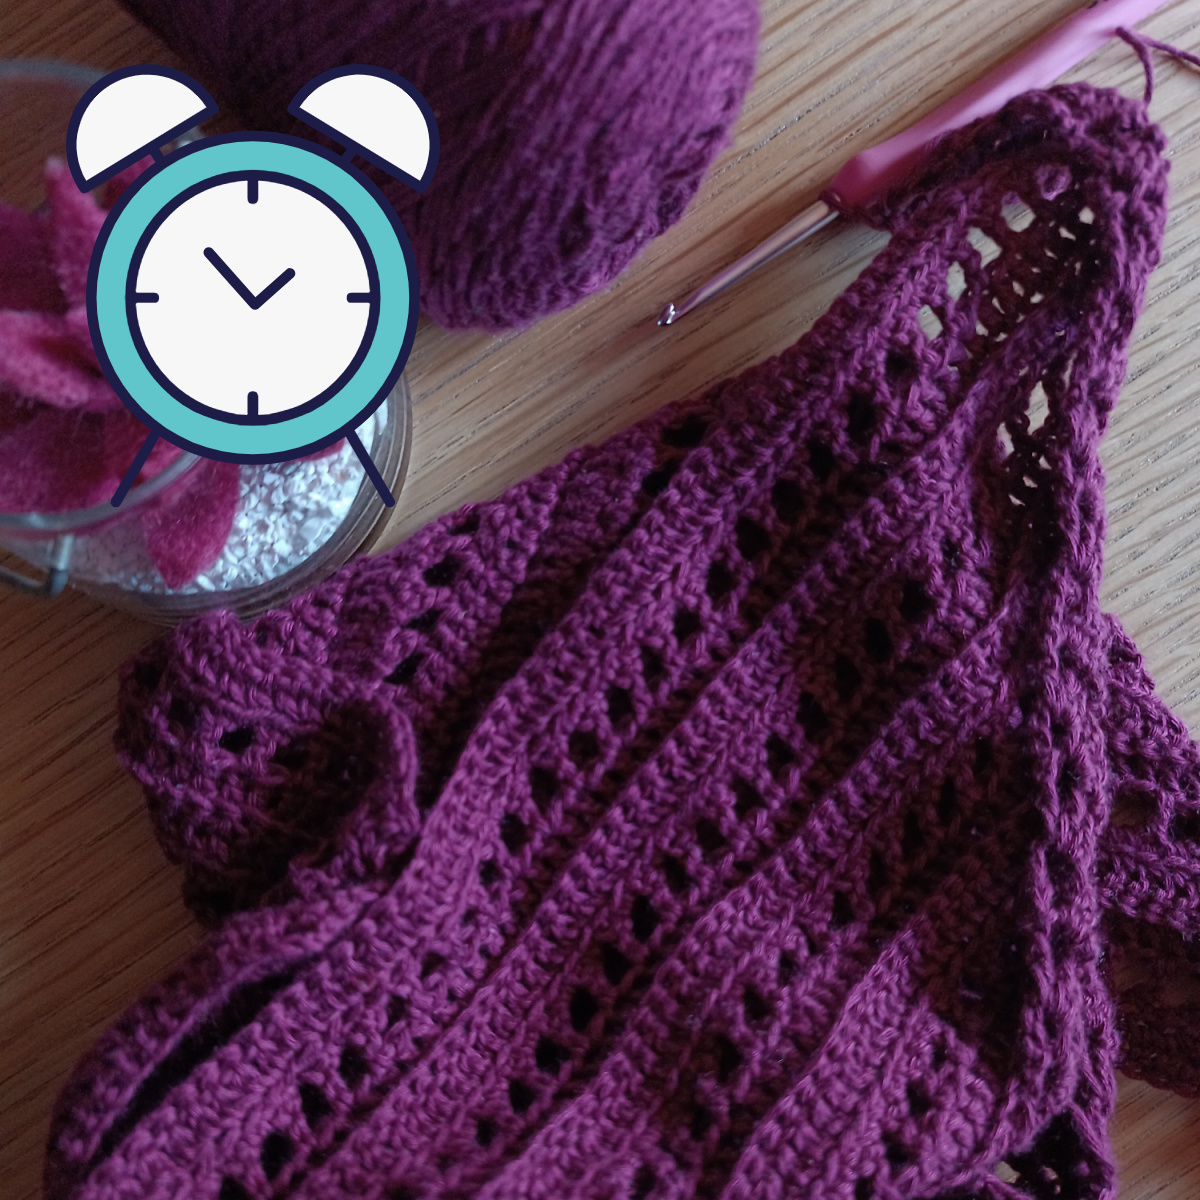 4 tips for crocheting without pain